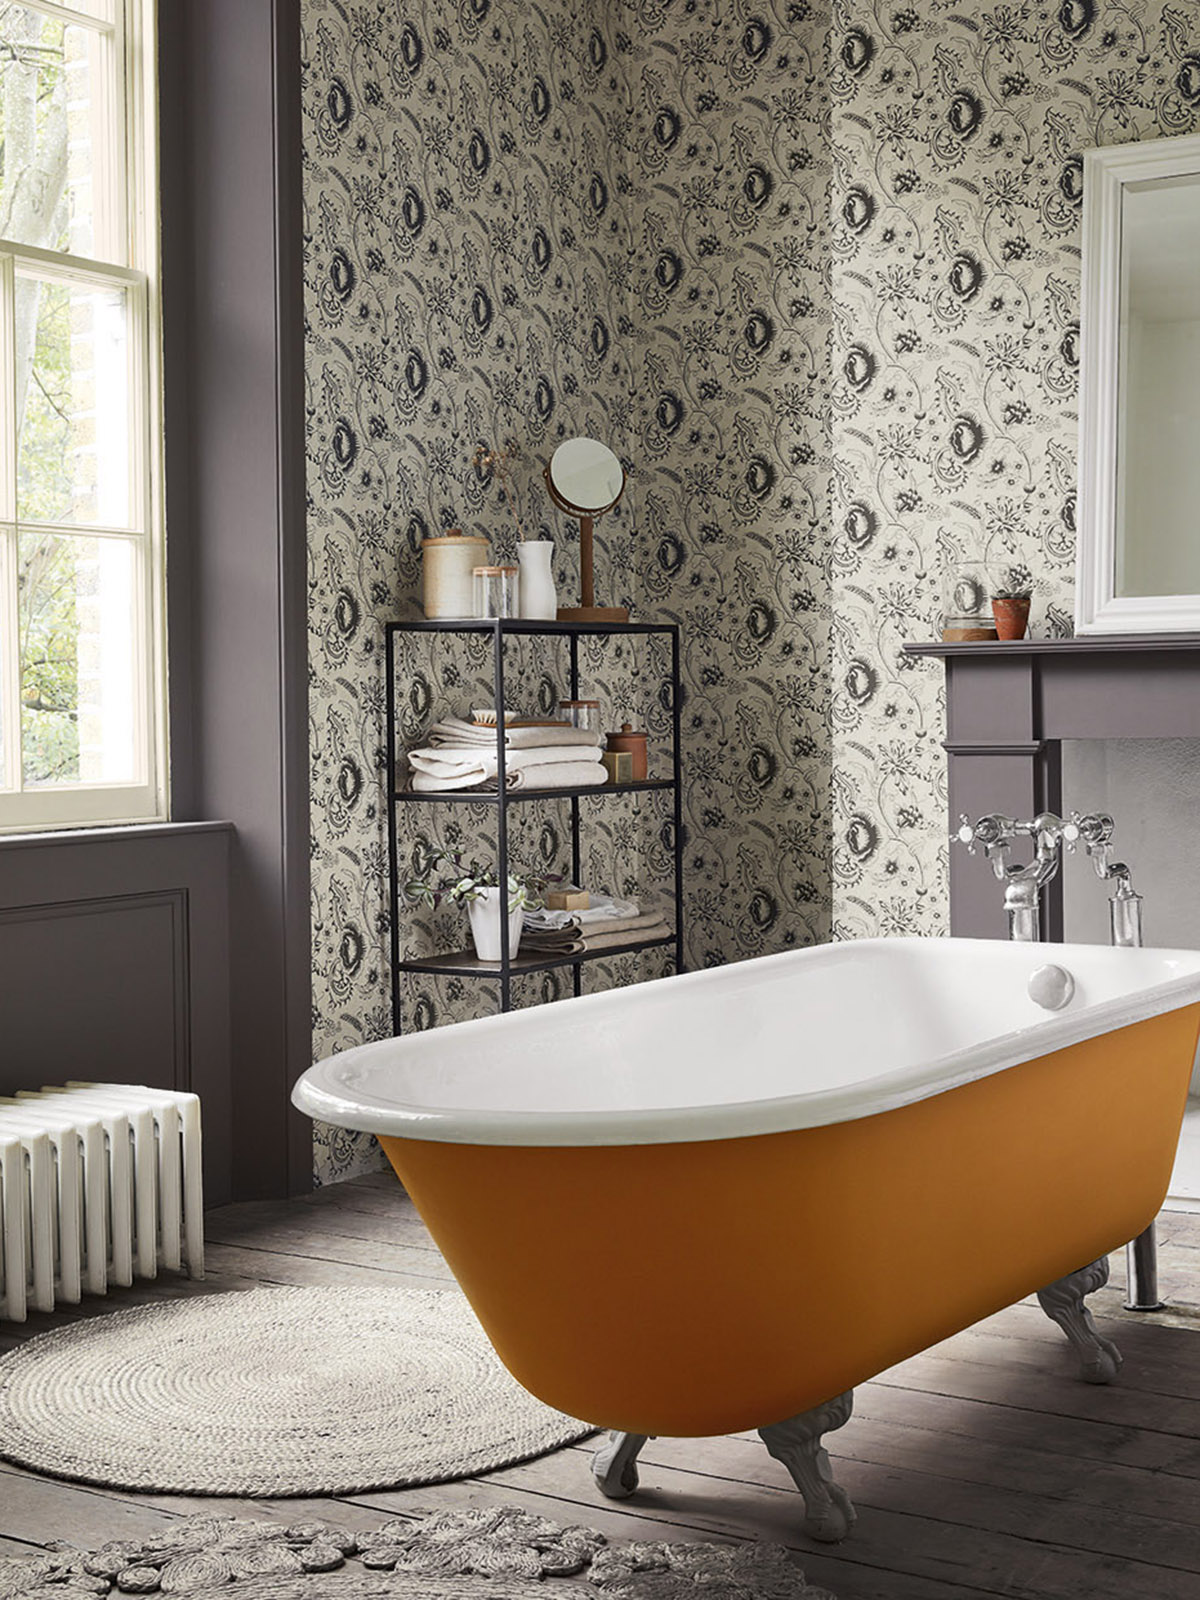 Wallpapers for bathroom and kitchen | Blog | Wallpaper from the 70s